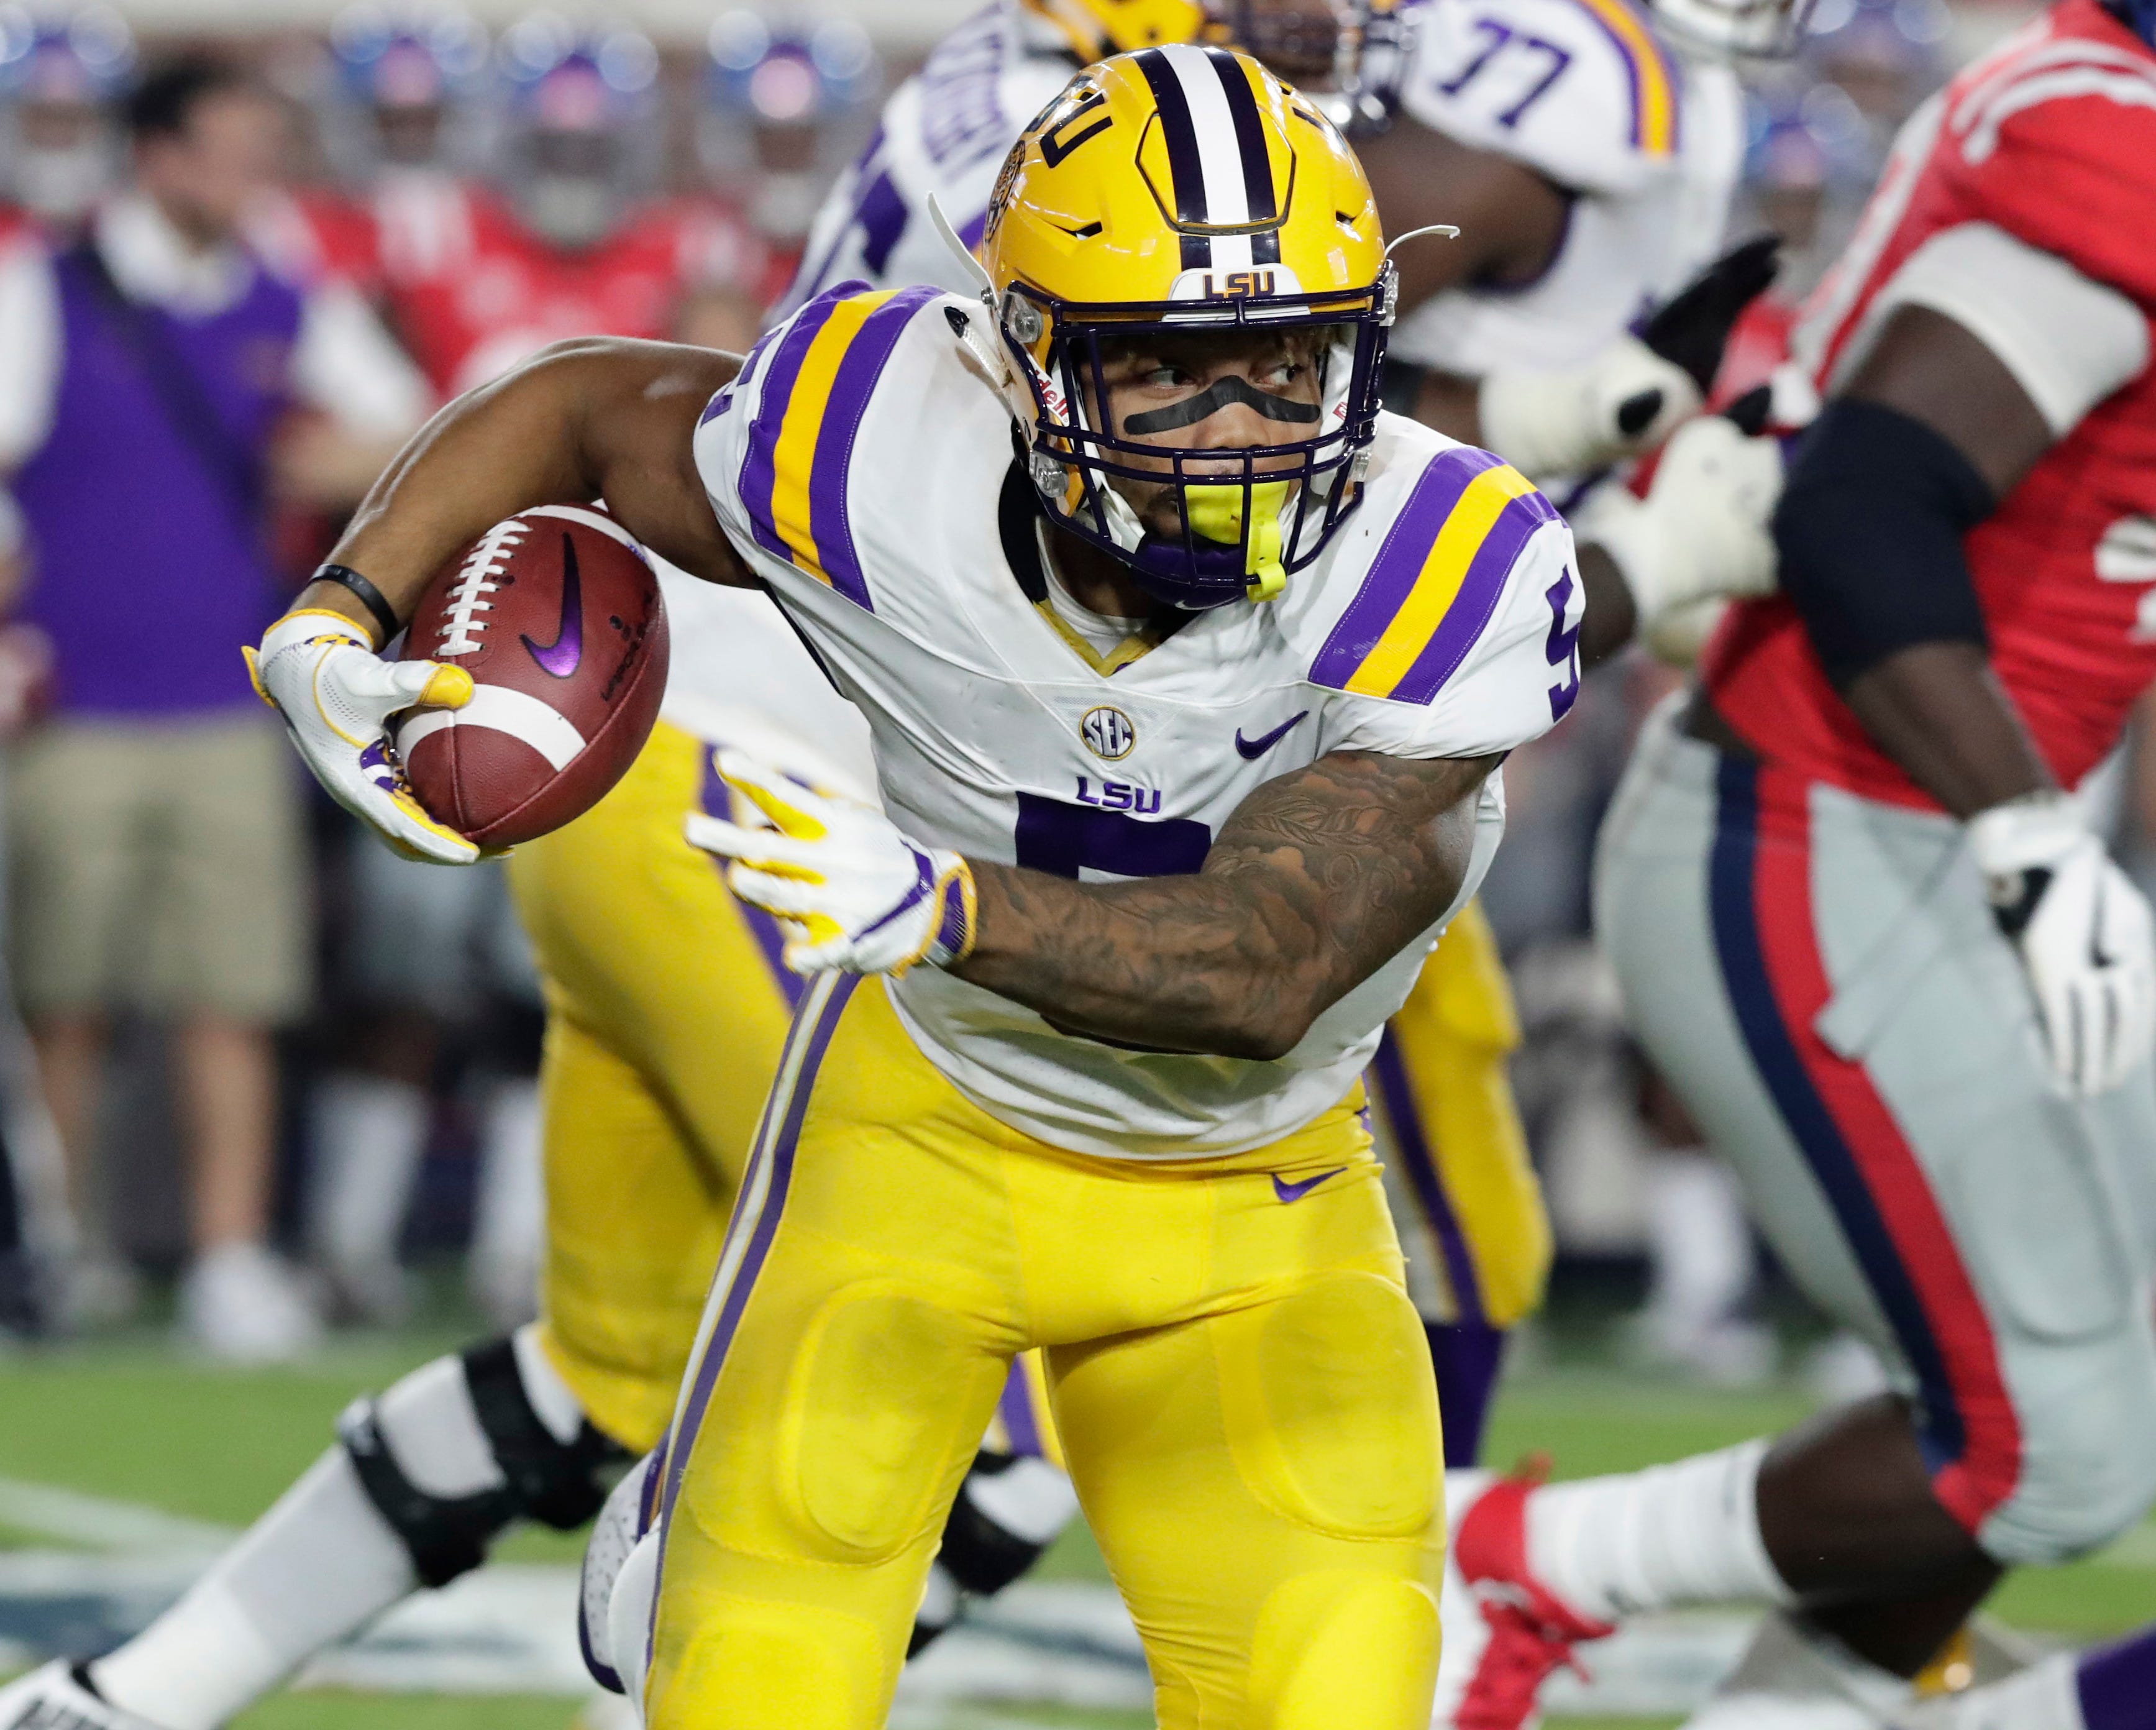 In this 2017 file photo, LSU running back Derrius Guice plays during an NCAA college football game in Oxford, Miss.